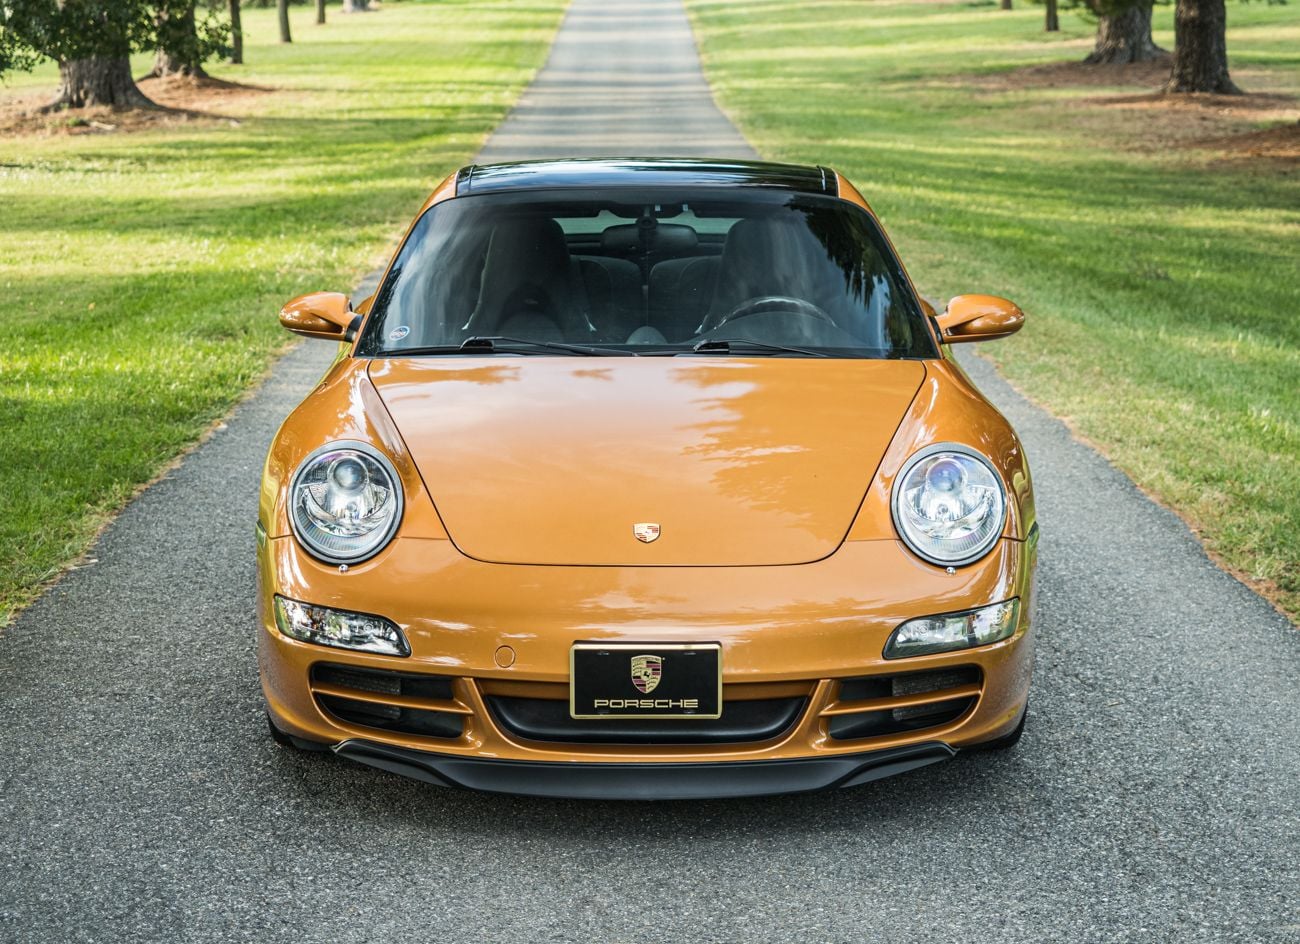 2007 Porsche 911 - 2007 911 Targa 4S - Nordic Gold Metallic - Used - VIN WP0BB29907S755115 - 34,600 Miles - 6 cyl - 4WD - Manual - Hatchback - Other - Silver Spring, MD 20901, United States